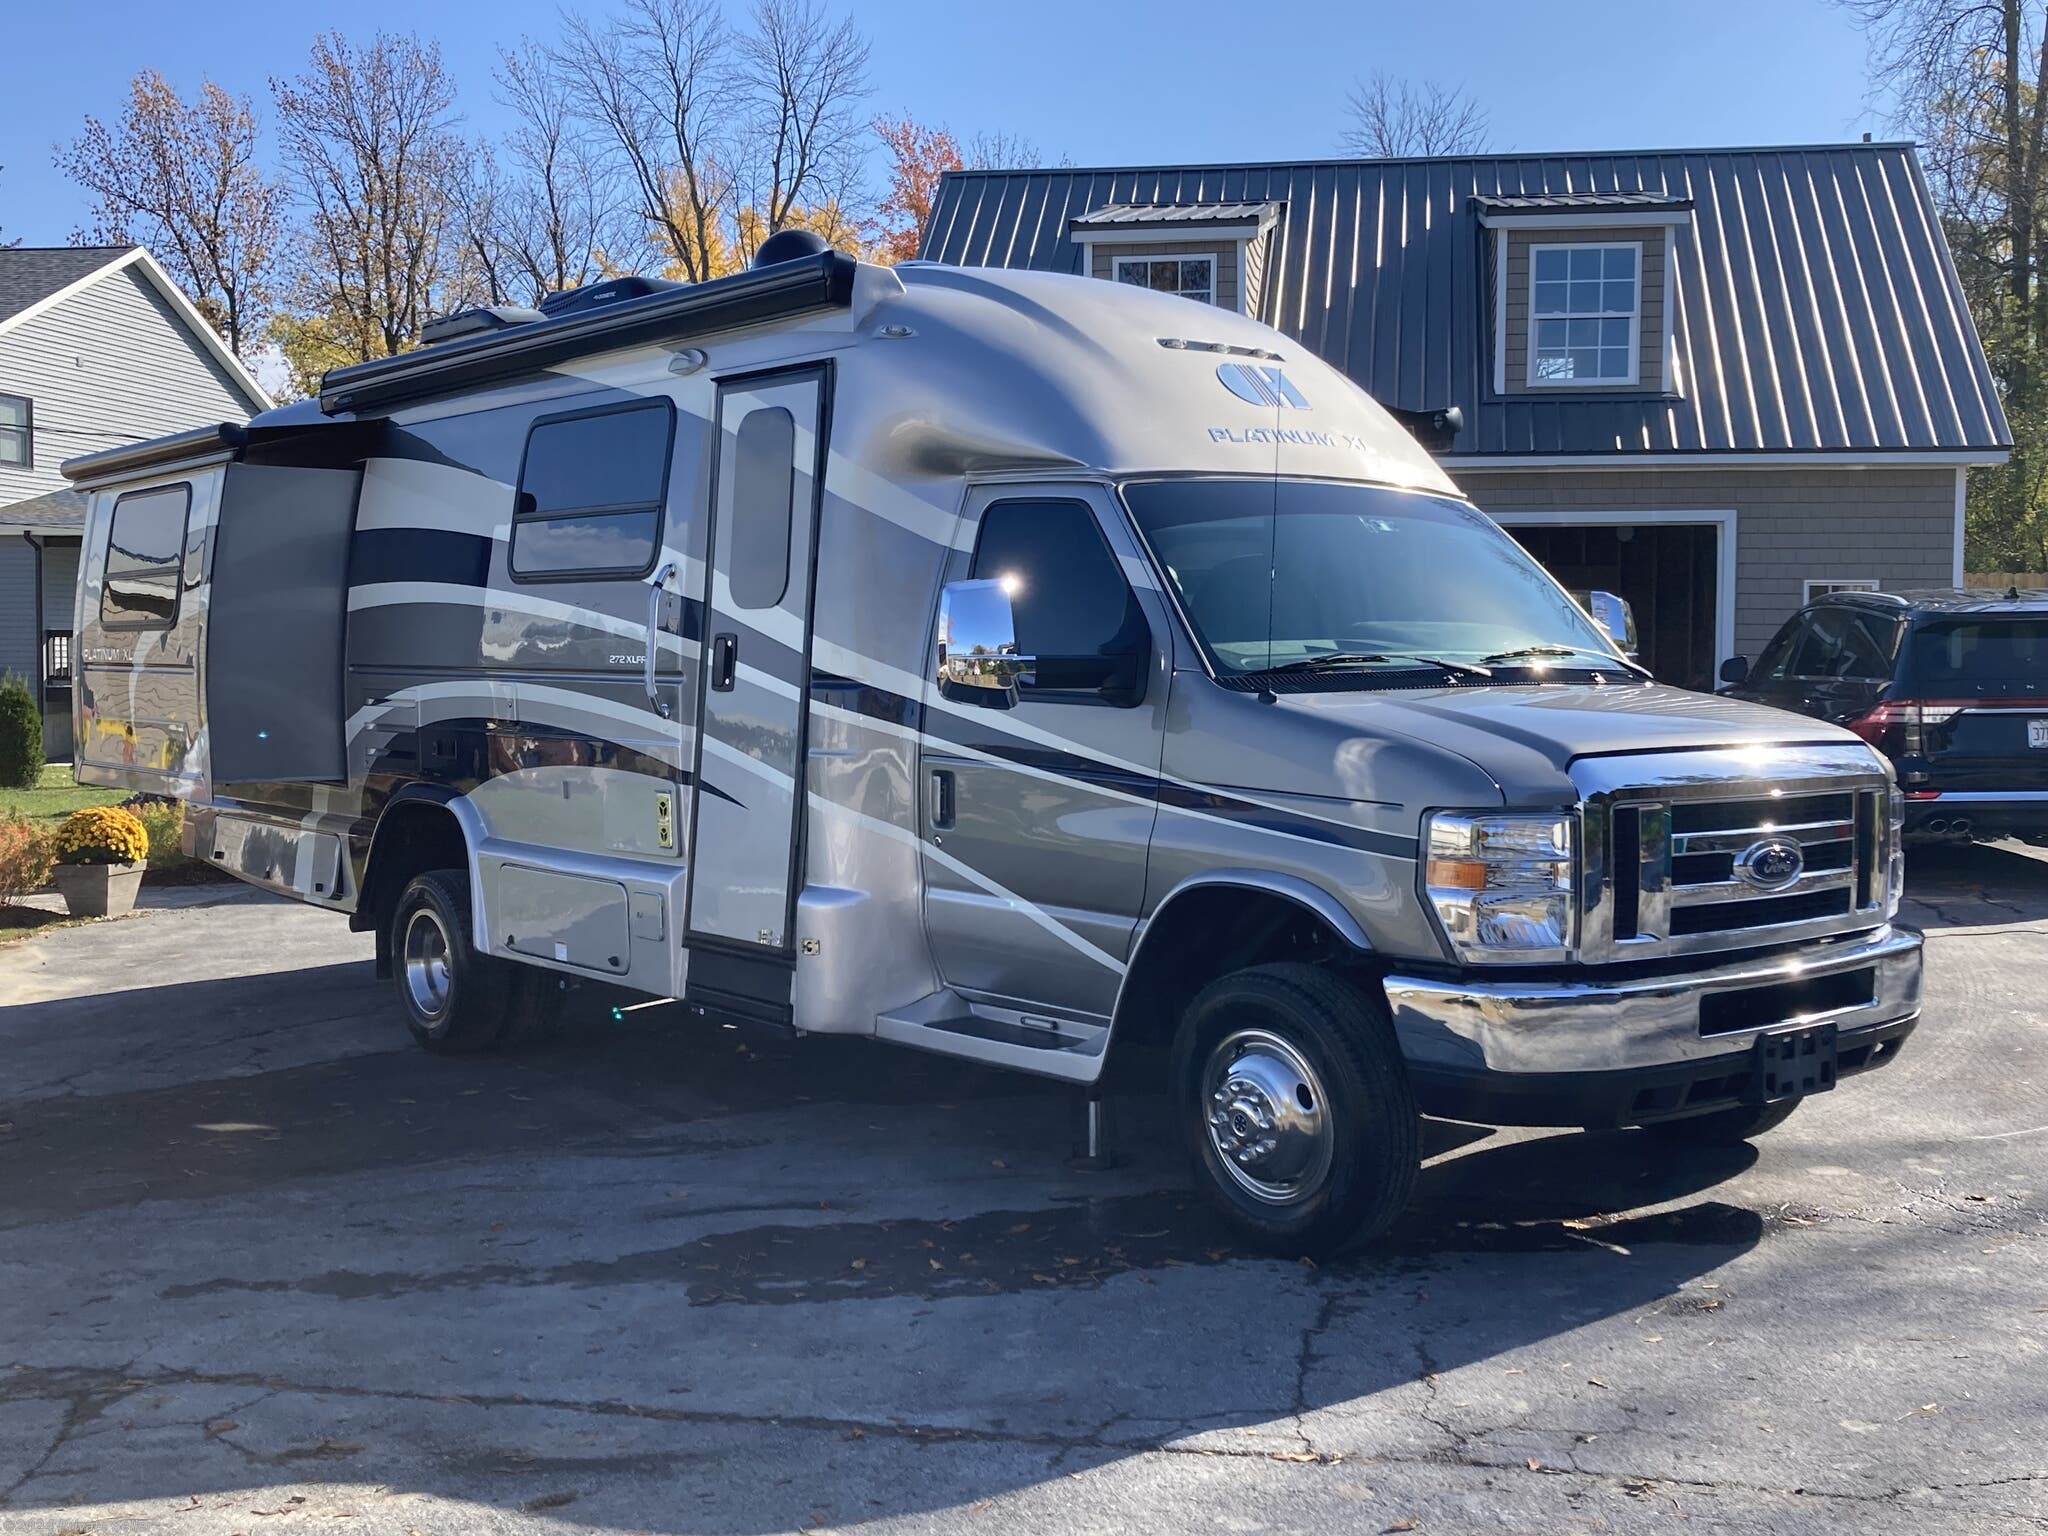 2019 Coach House Platinum 272XL FR RV for Sale in Plattsburgh, NY 12901 | |   Classifieds